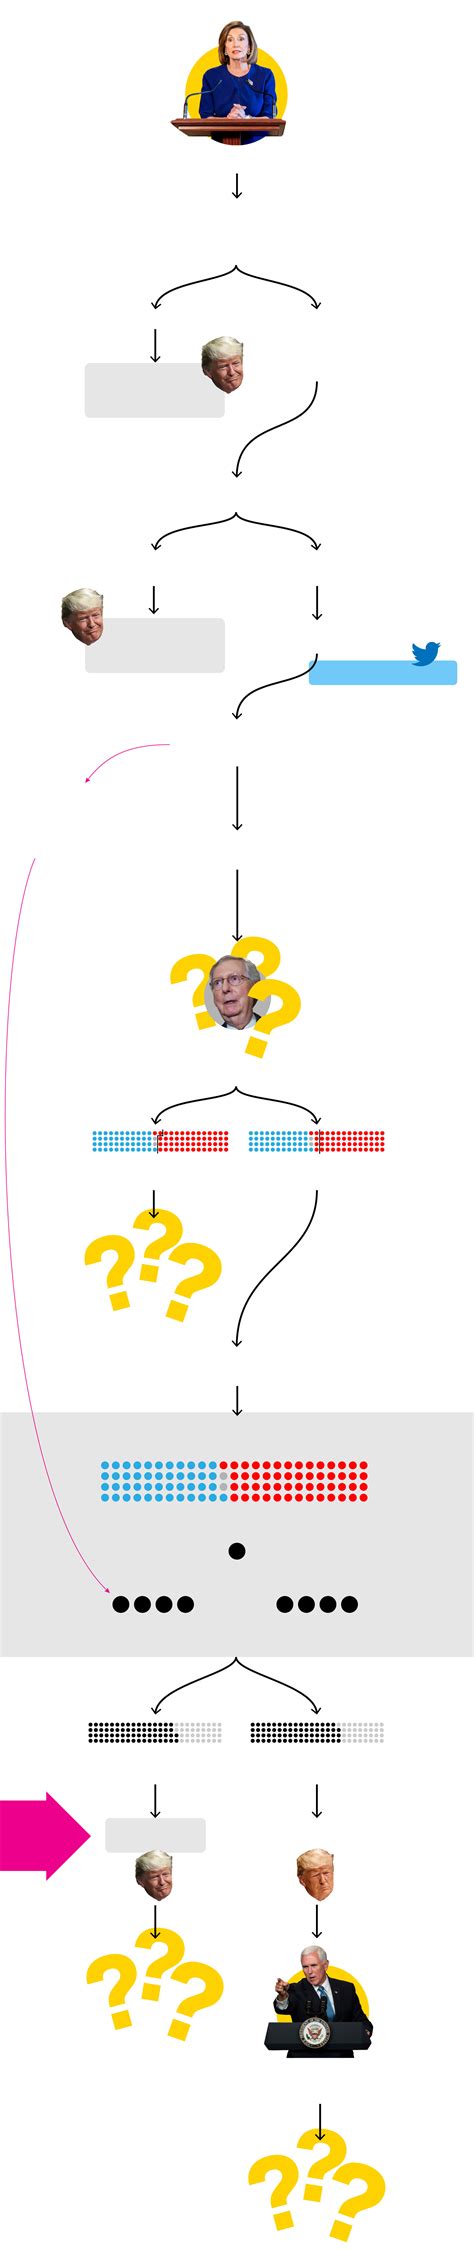 Early chatter has heightened interest in the process, even though experts caution that such talk is premature still, the early chatter has heightened interest in how the impeachment process works. Confused By The Impeachment Process? This Flowchart Should ...